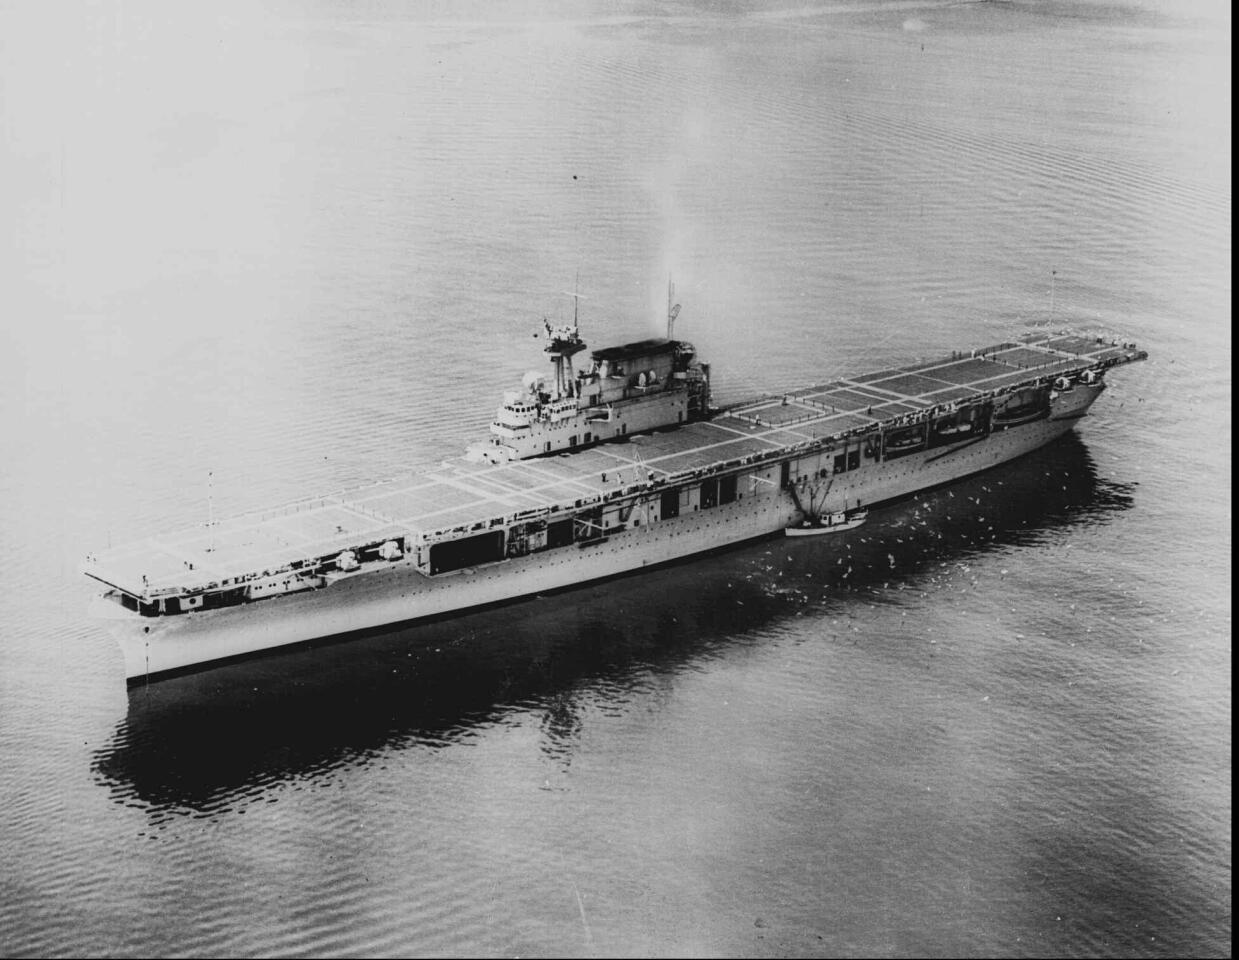 The USS Yorktown, shown in this undated file photo, was a World War II aircraft carrier that was sunk by Japanese torpedoes in the battle of Midway on June 7, 1942. The wreck was discovered on May 18, 1998, by National Geographic explorer Robert Ballard.